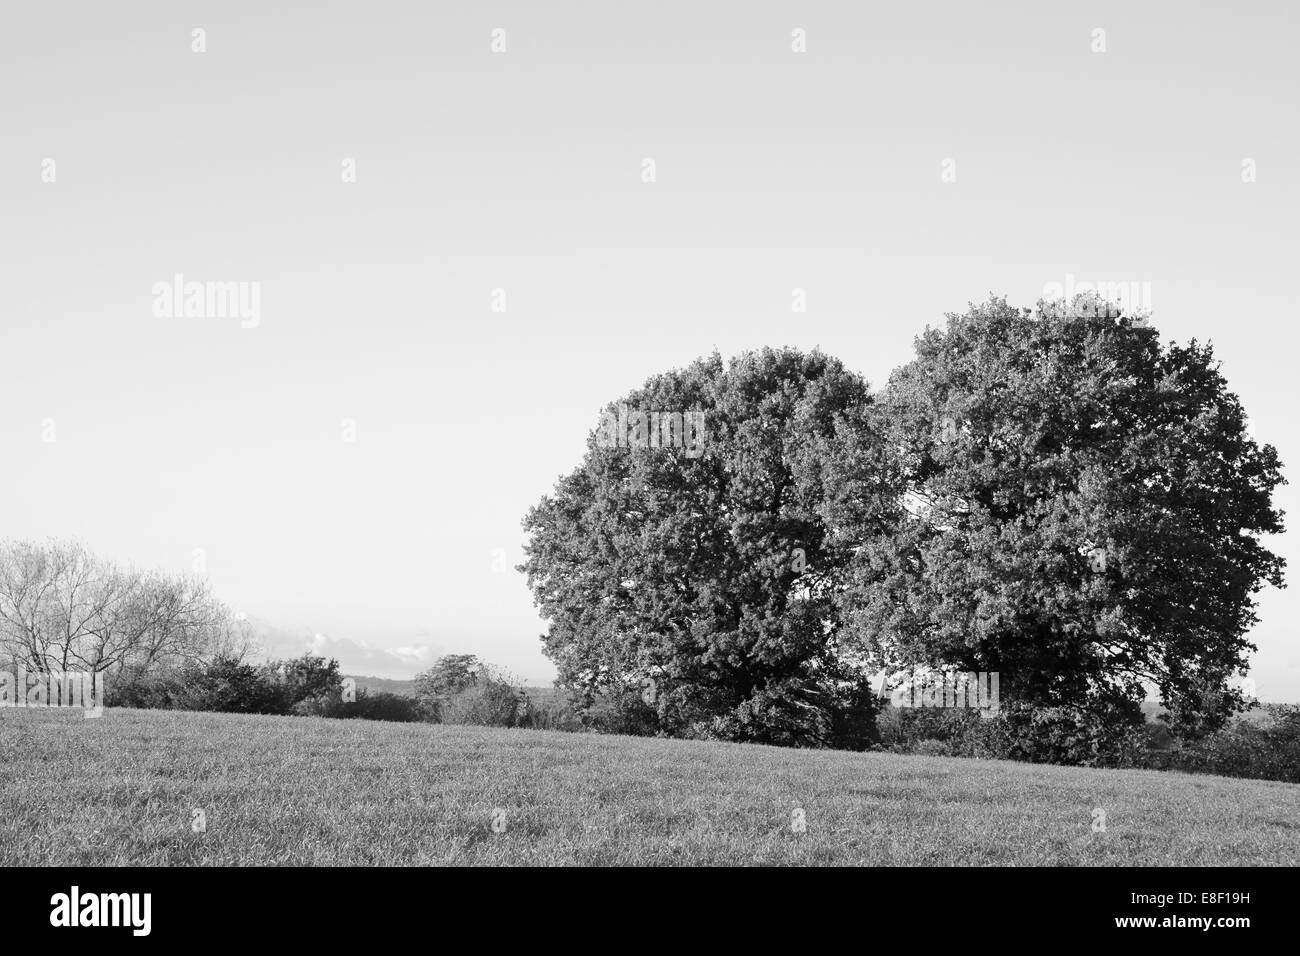 Lush pasture with two mature oak trees on a sunny autumn day - monochrome processing Stock Photo